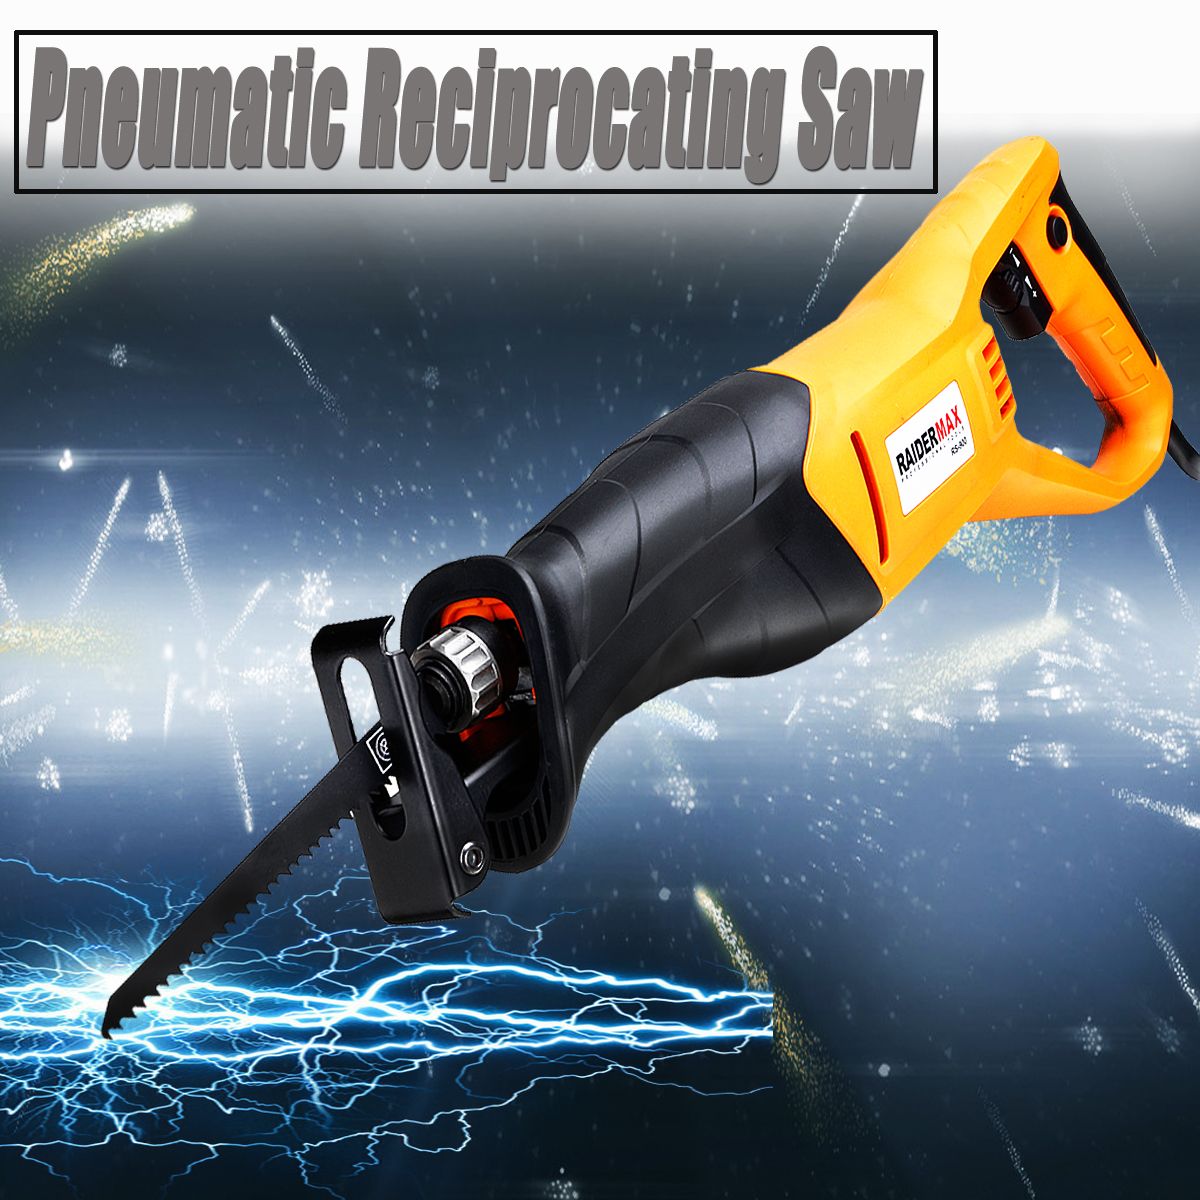 900W-220V-Electric-Reciprocating-Saw-Reciprocating-Sabre-Cutting-Pruning-Saw-Woodworking-Metal-Tool-1298012